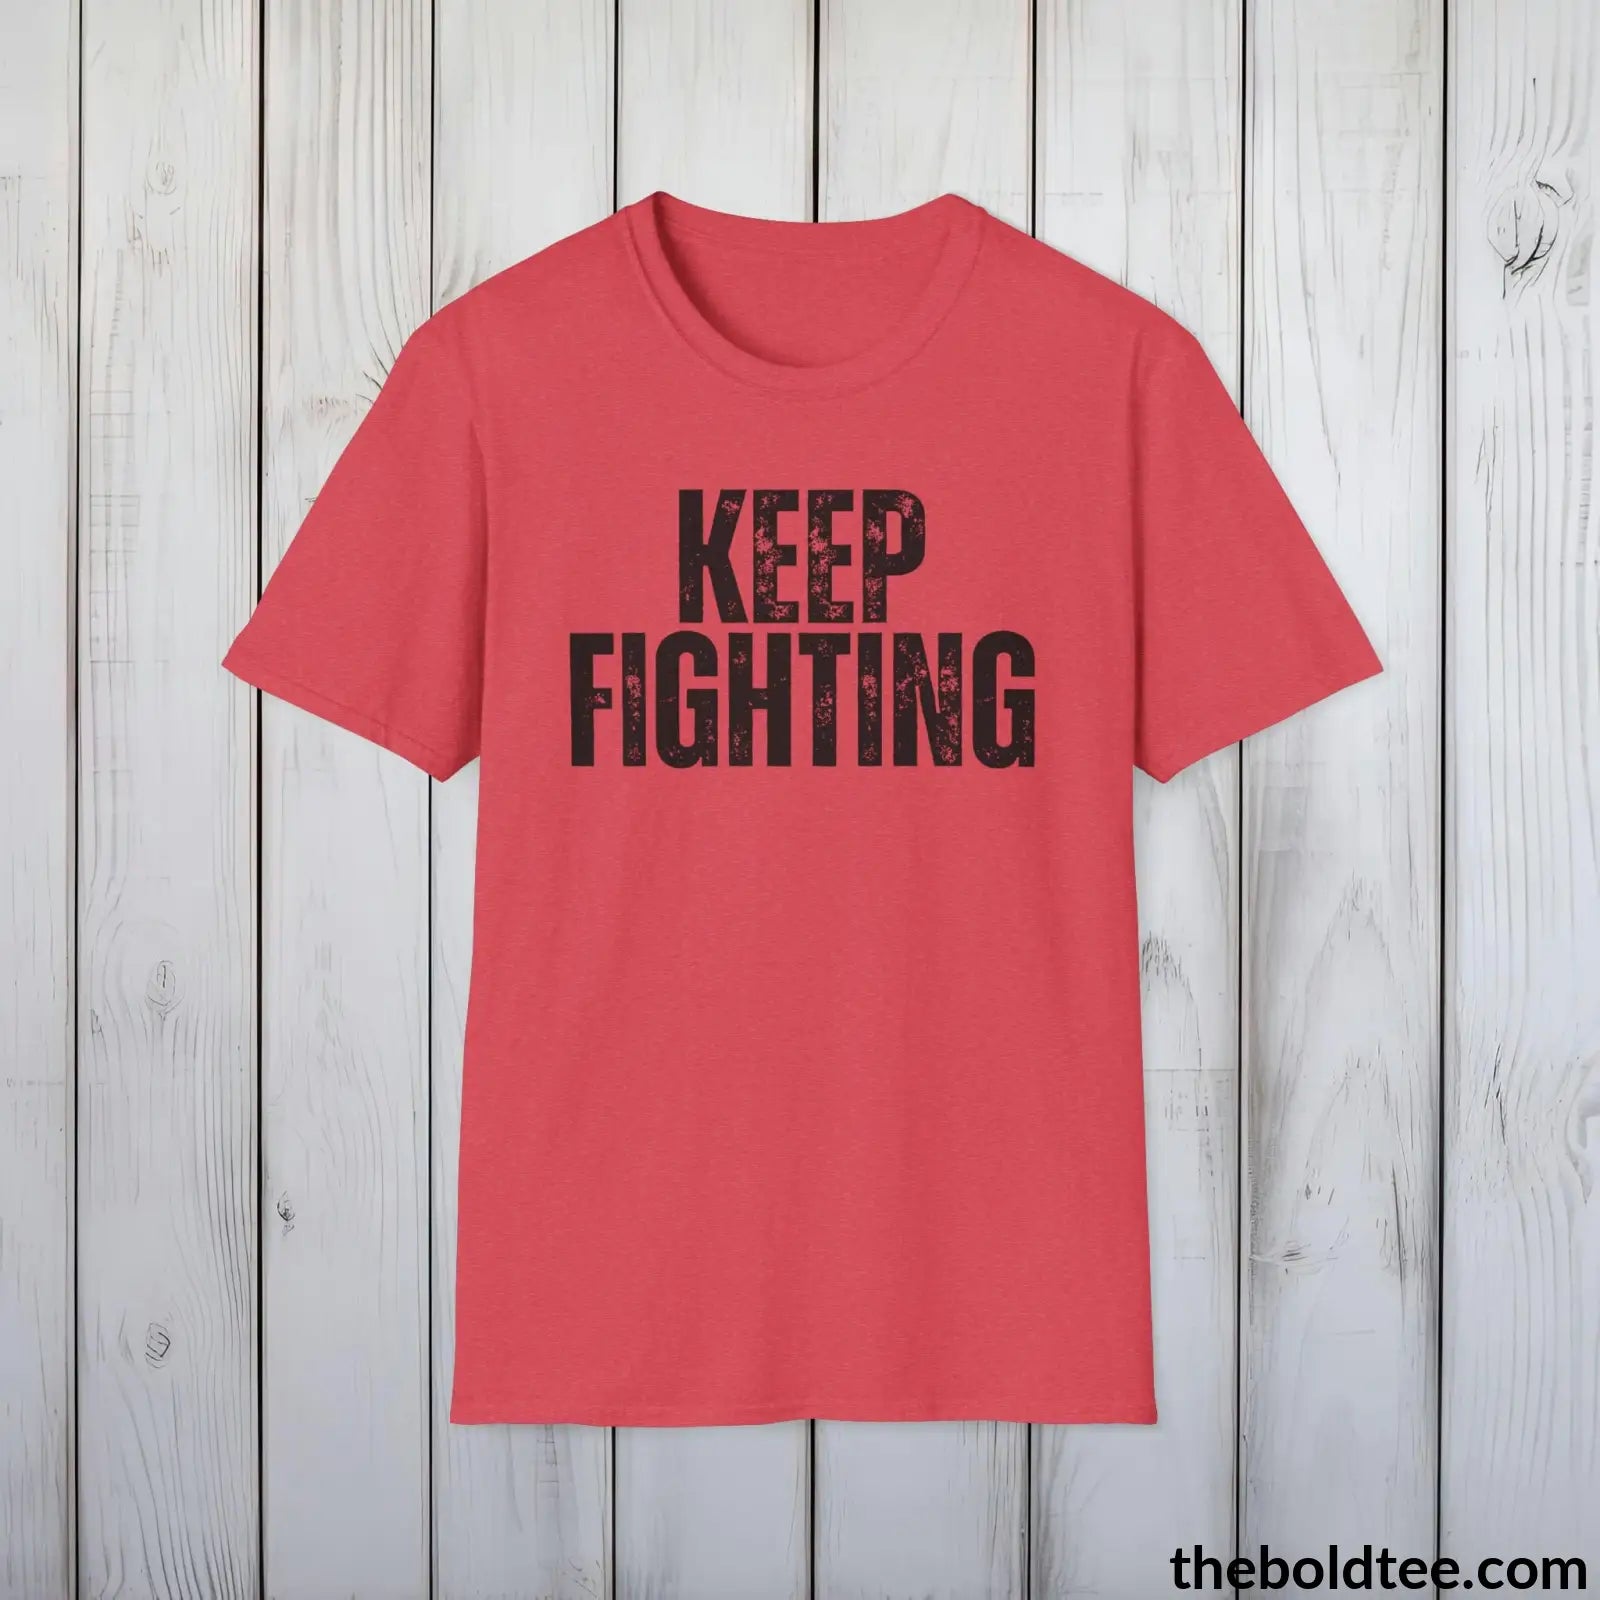 T-Shirt Heather Red / S KEEP FIGHTING Mental Health Awareness Tee - Soft Cotton Crewneck Unisex T-Shirt - 8 Trendy Colors